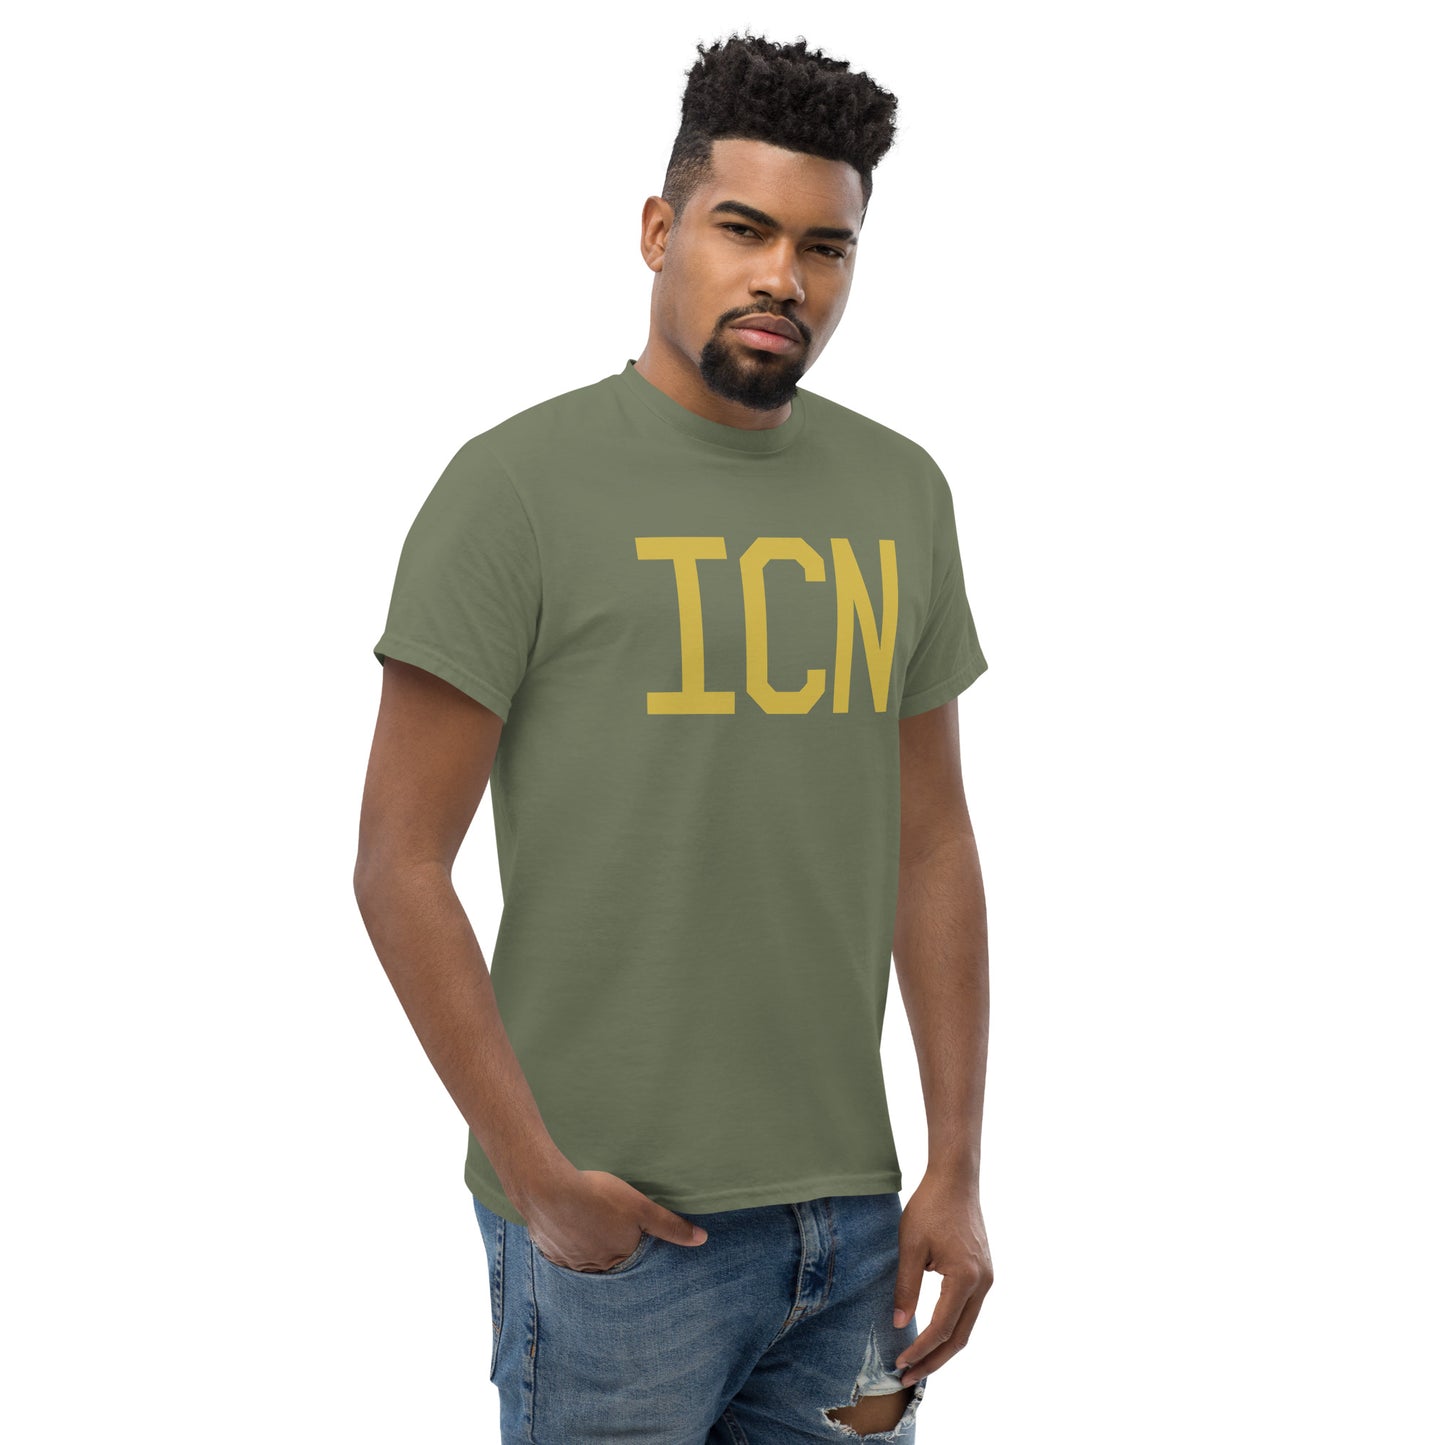 Aviation Enthusiast Men's Tee - Old Gold Graphic • ICN Seoul • YHM Designs - Image 08